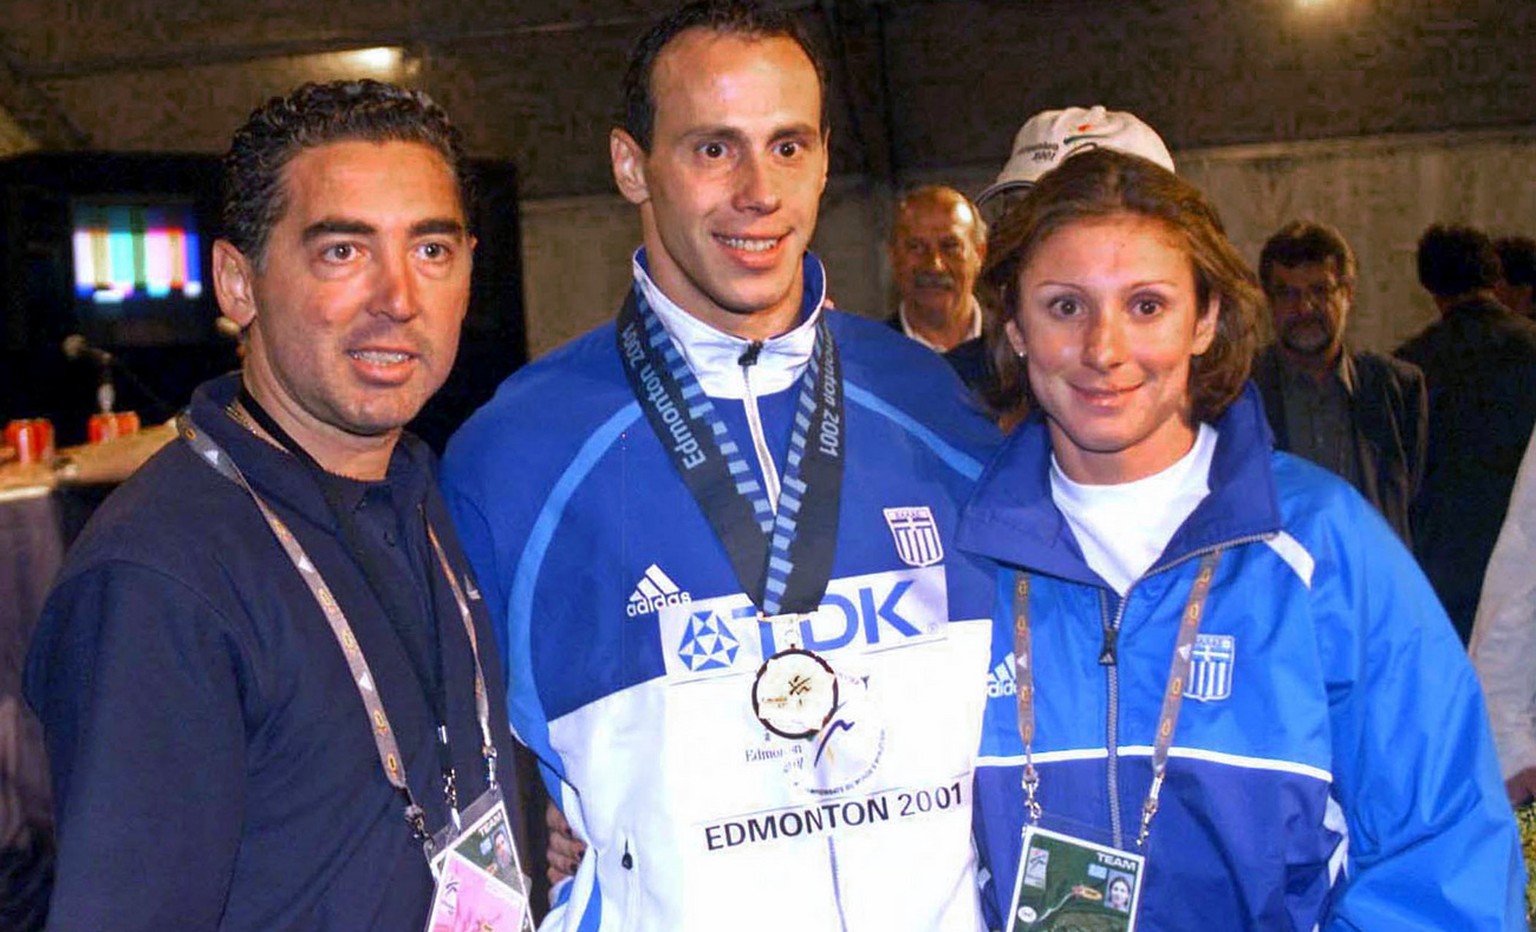 This is an August 9, 2001 photo of Greek athletes Konstantinos Kenteris, center, and Katerina Thanou, the 100-meter silver medalist in Sydney, right with their coach Christos Tsekos taken at the World ...